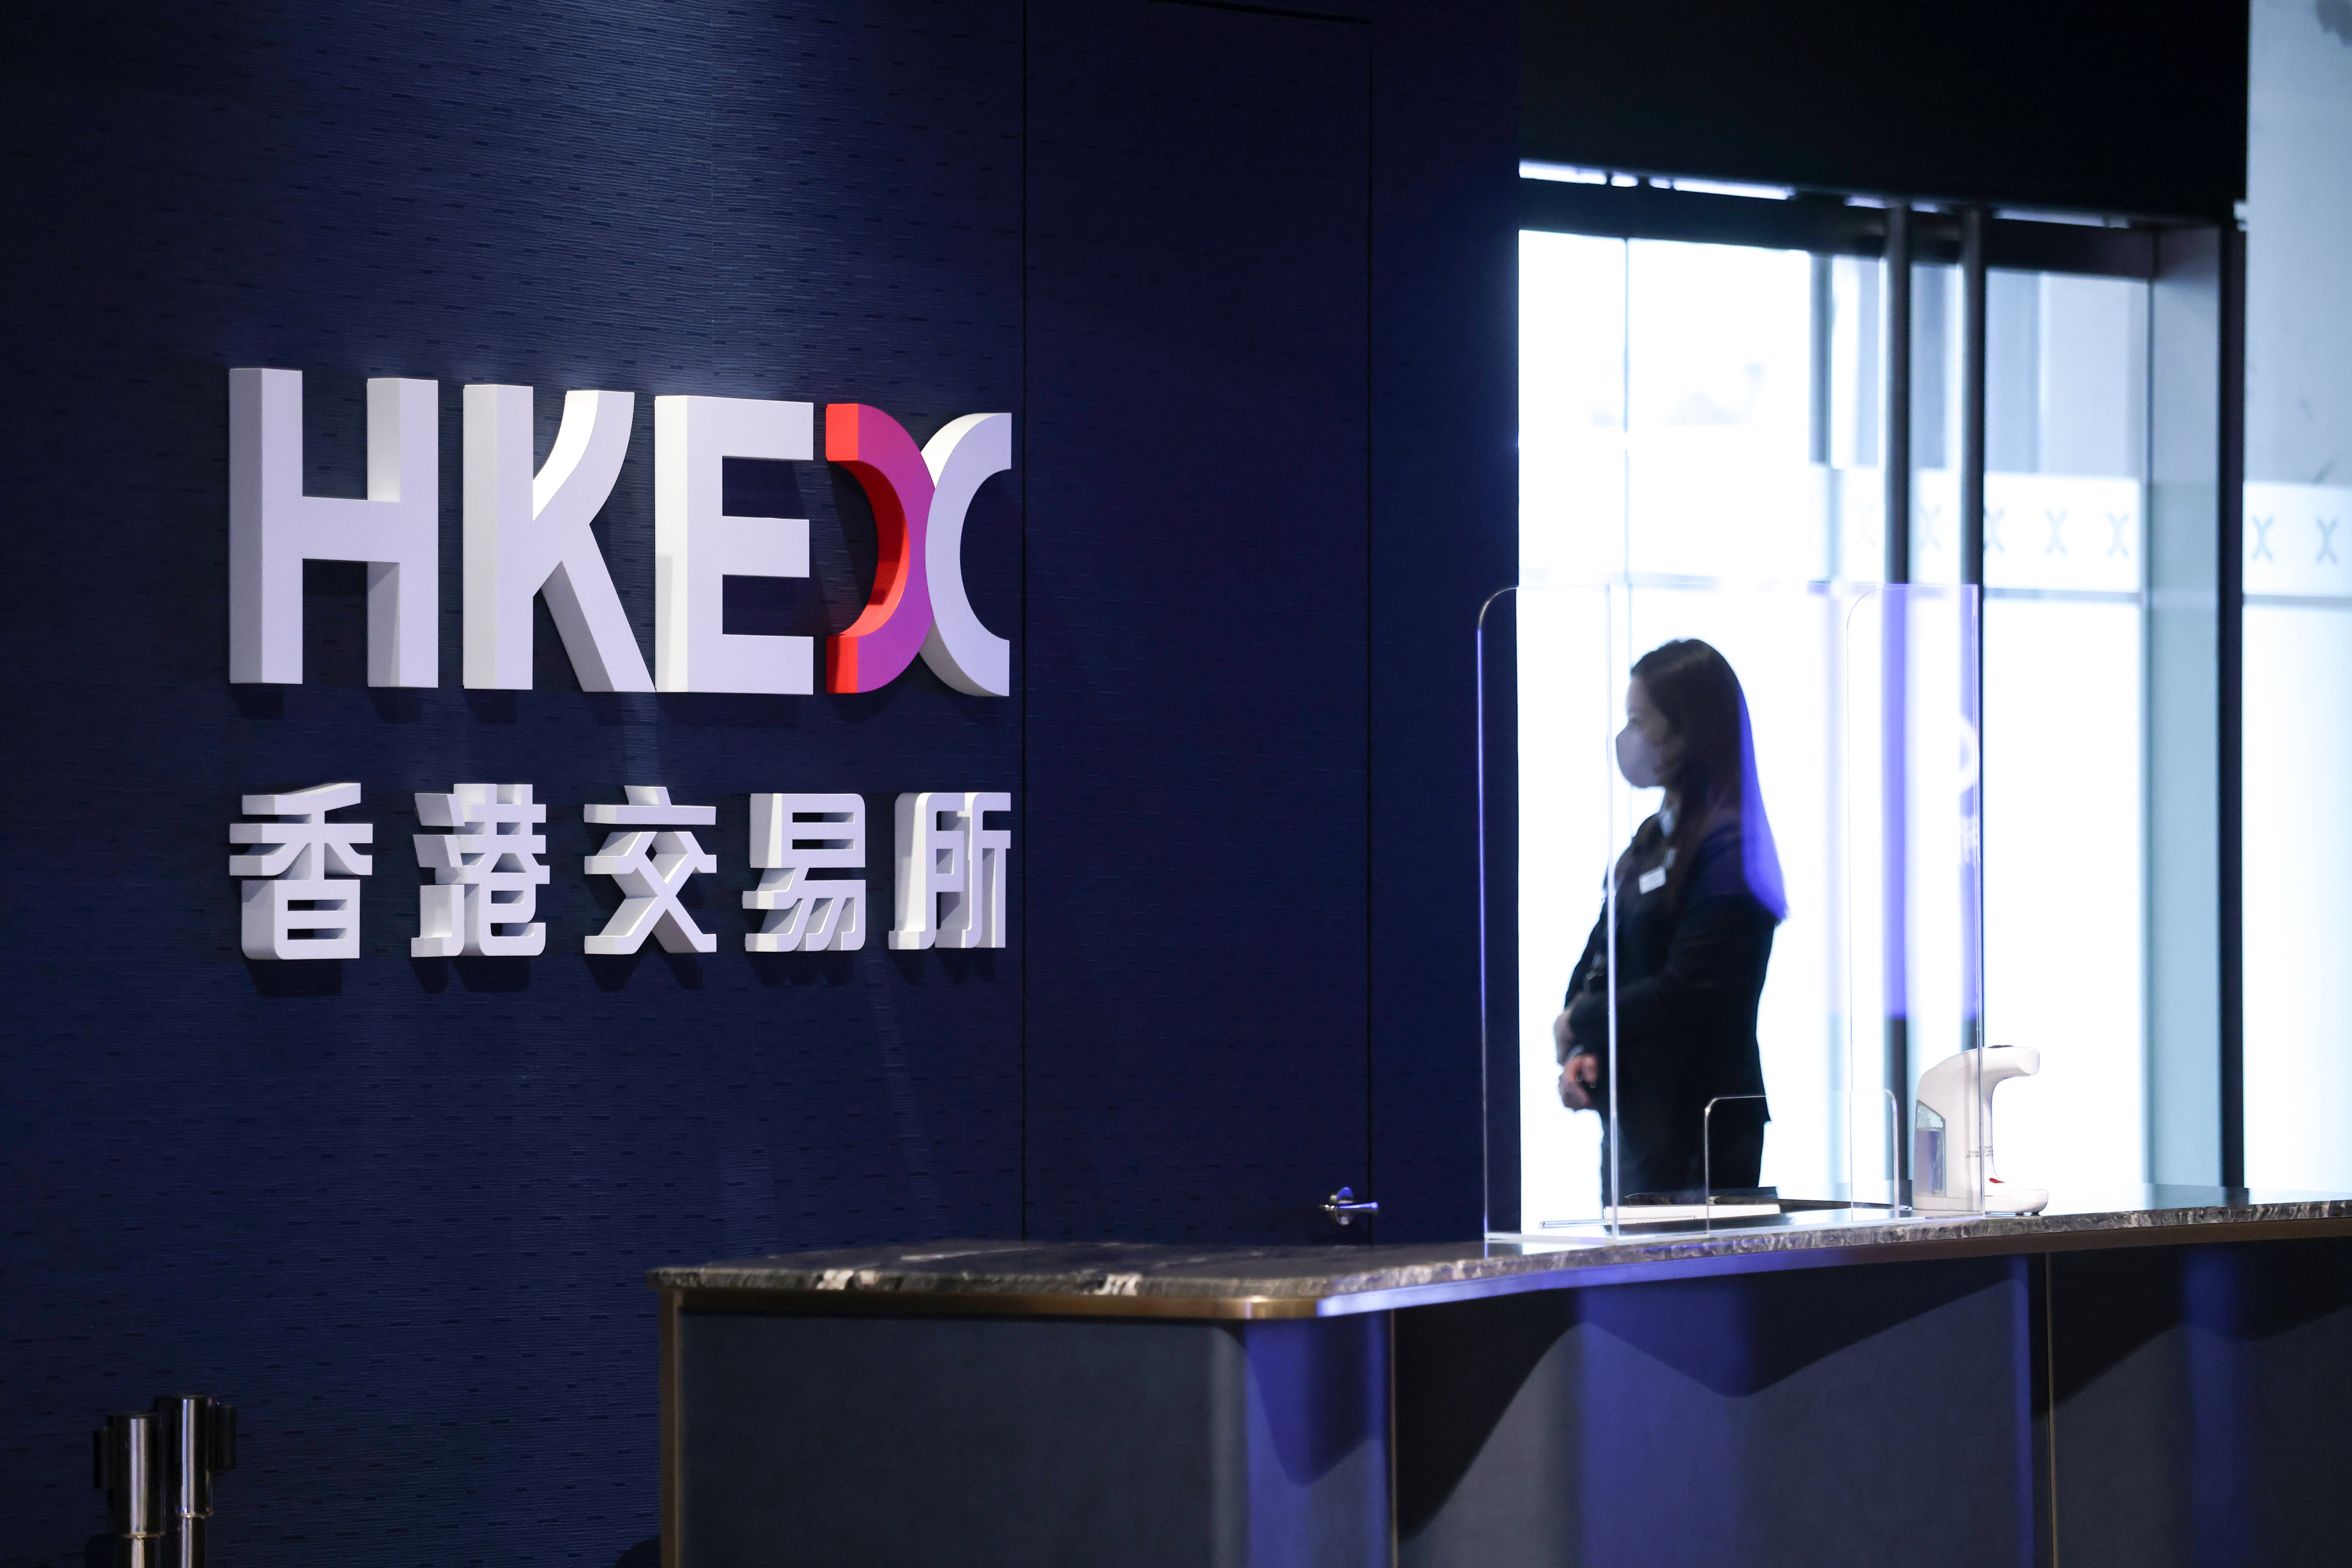 Hong Kong-based brokers believe the ruling will allow HKEX to develop its commodities trading business. Photo: Jonathan Wong